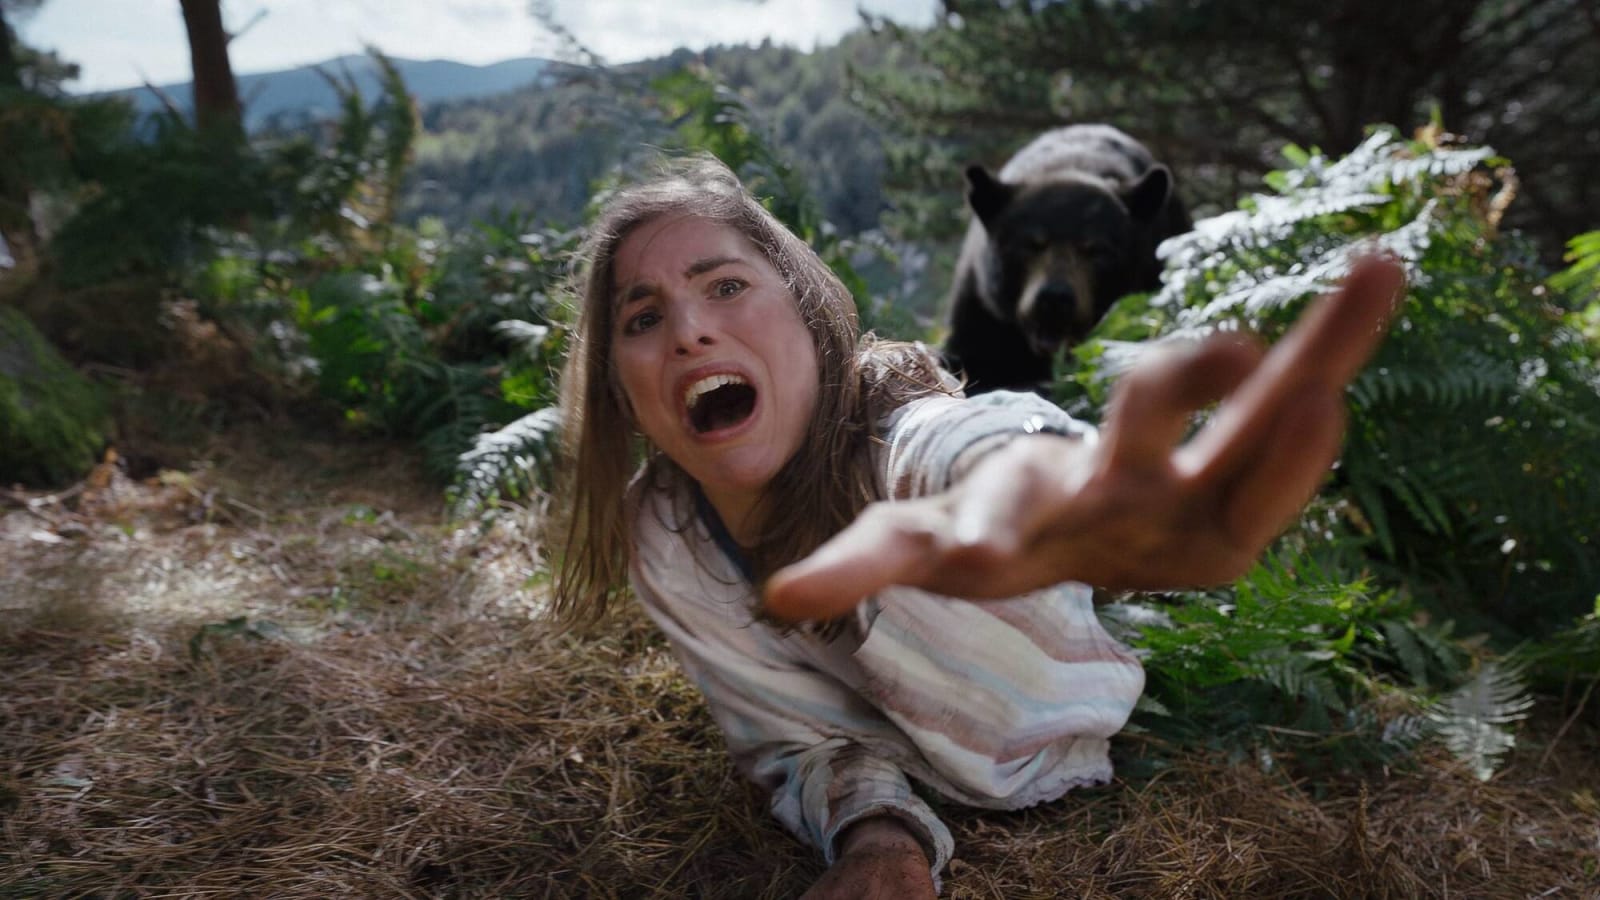 Grizzly violence: 20 of the deadliest bears in movies